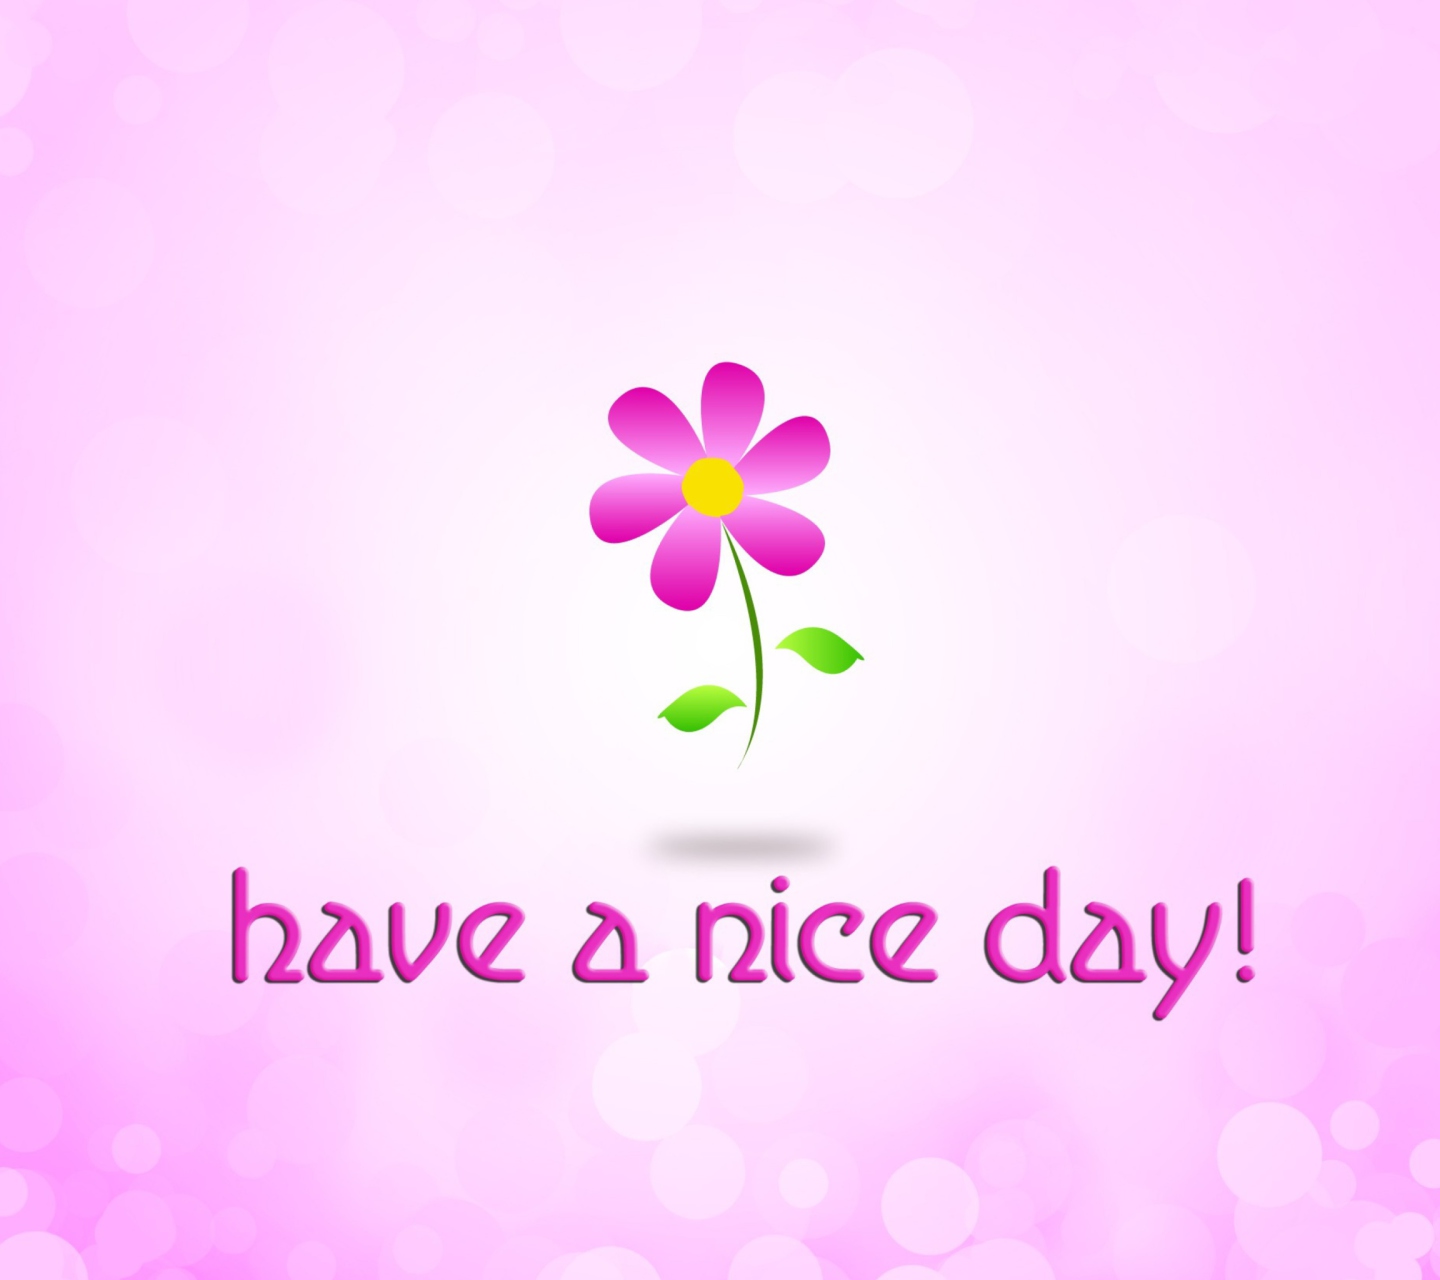 Das Have a Nice Day Wallpaper 1440x1280